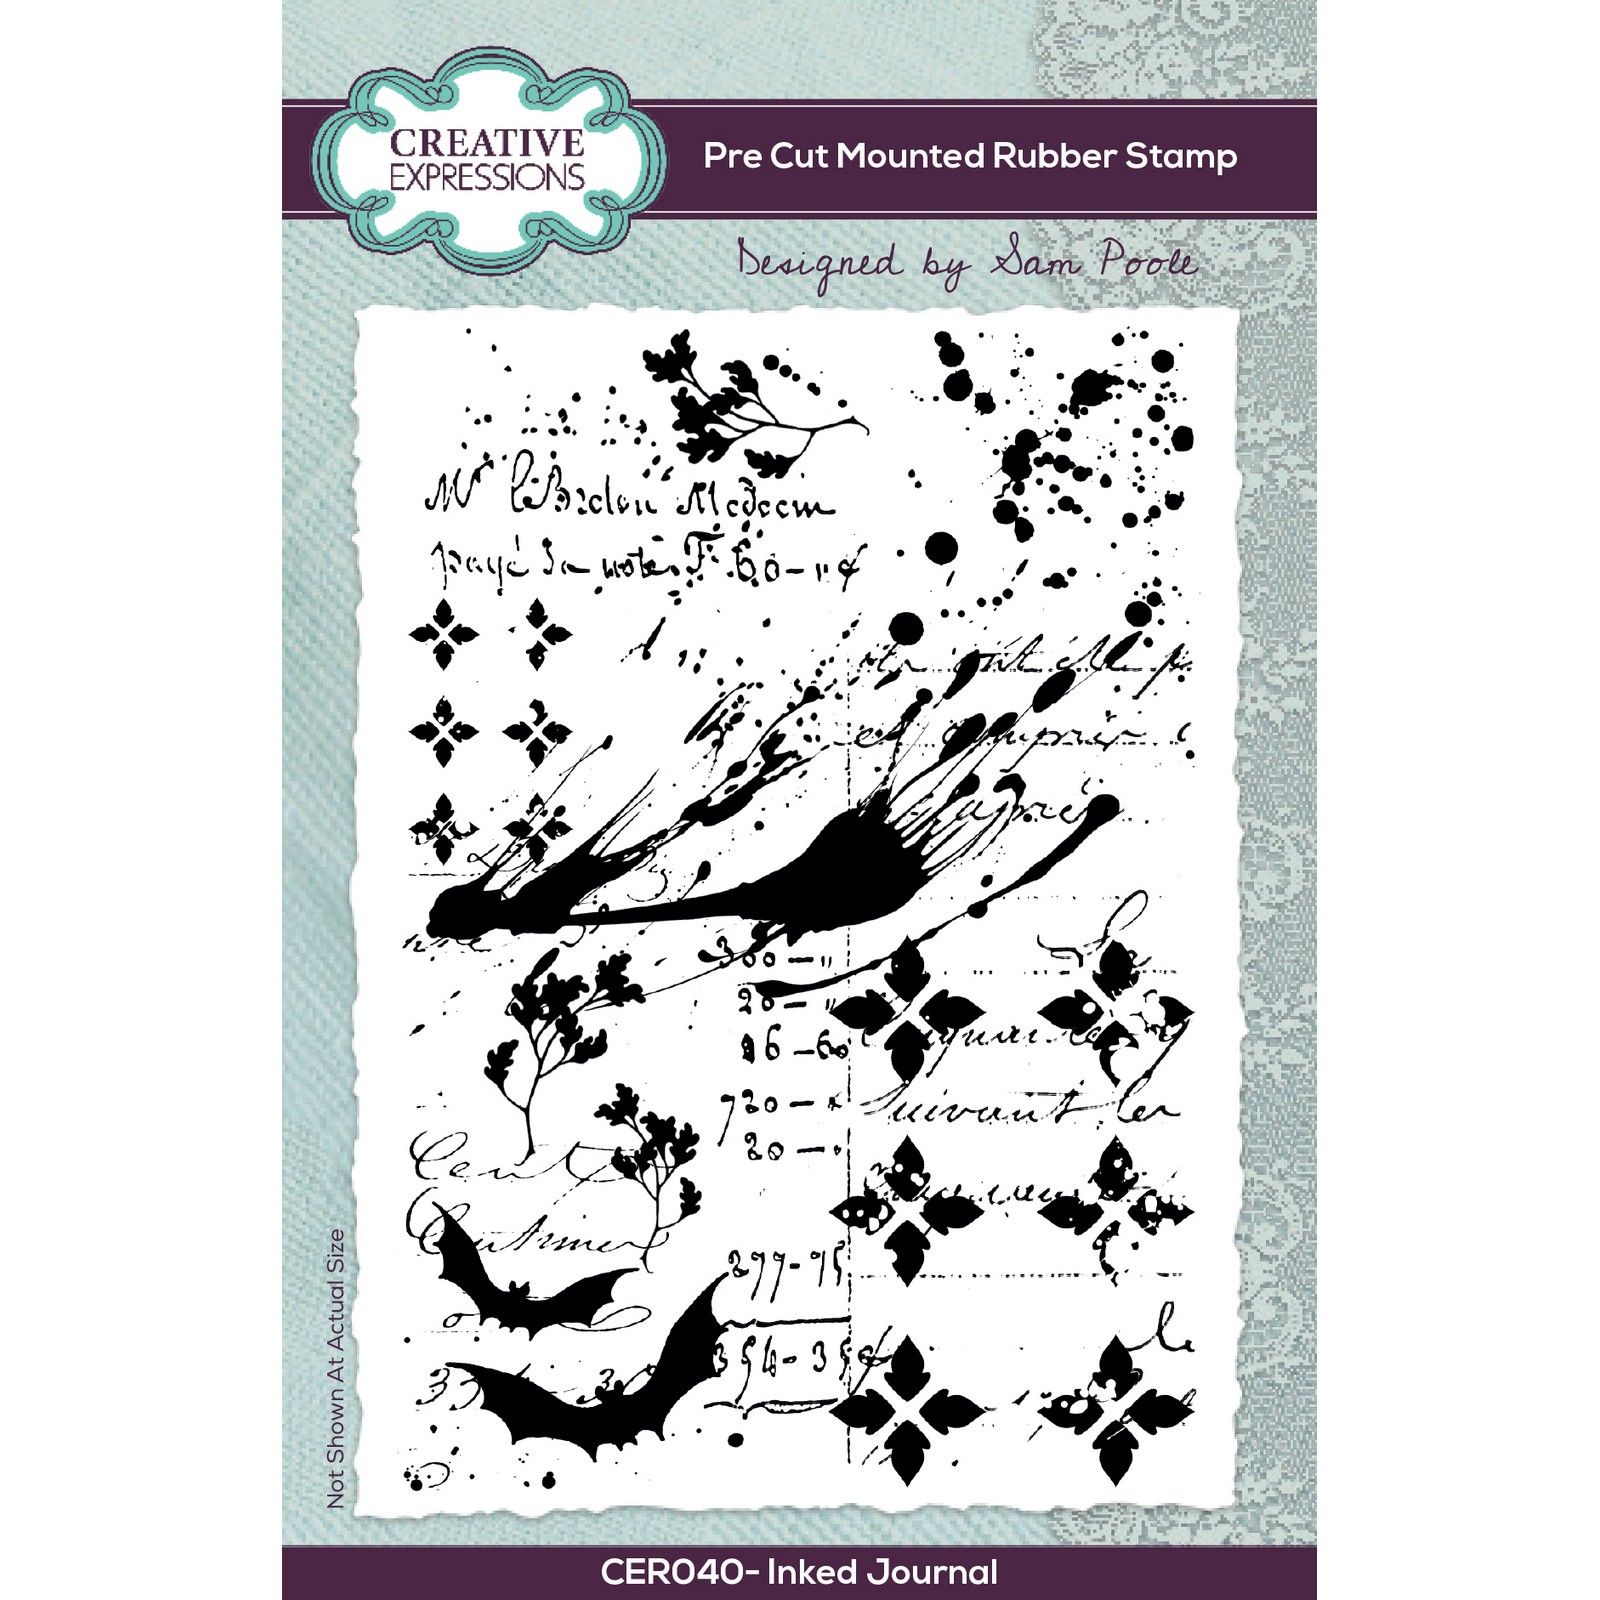 Creative Expressions • Pre Cut Rubber Stamp Inked Journal